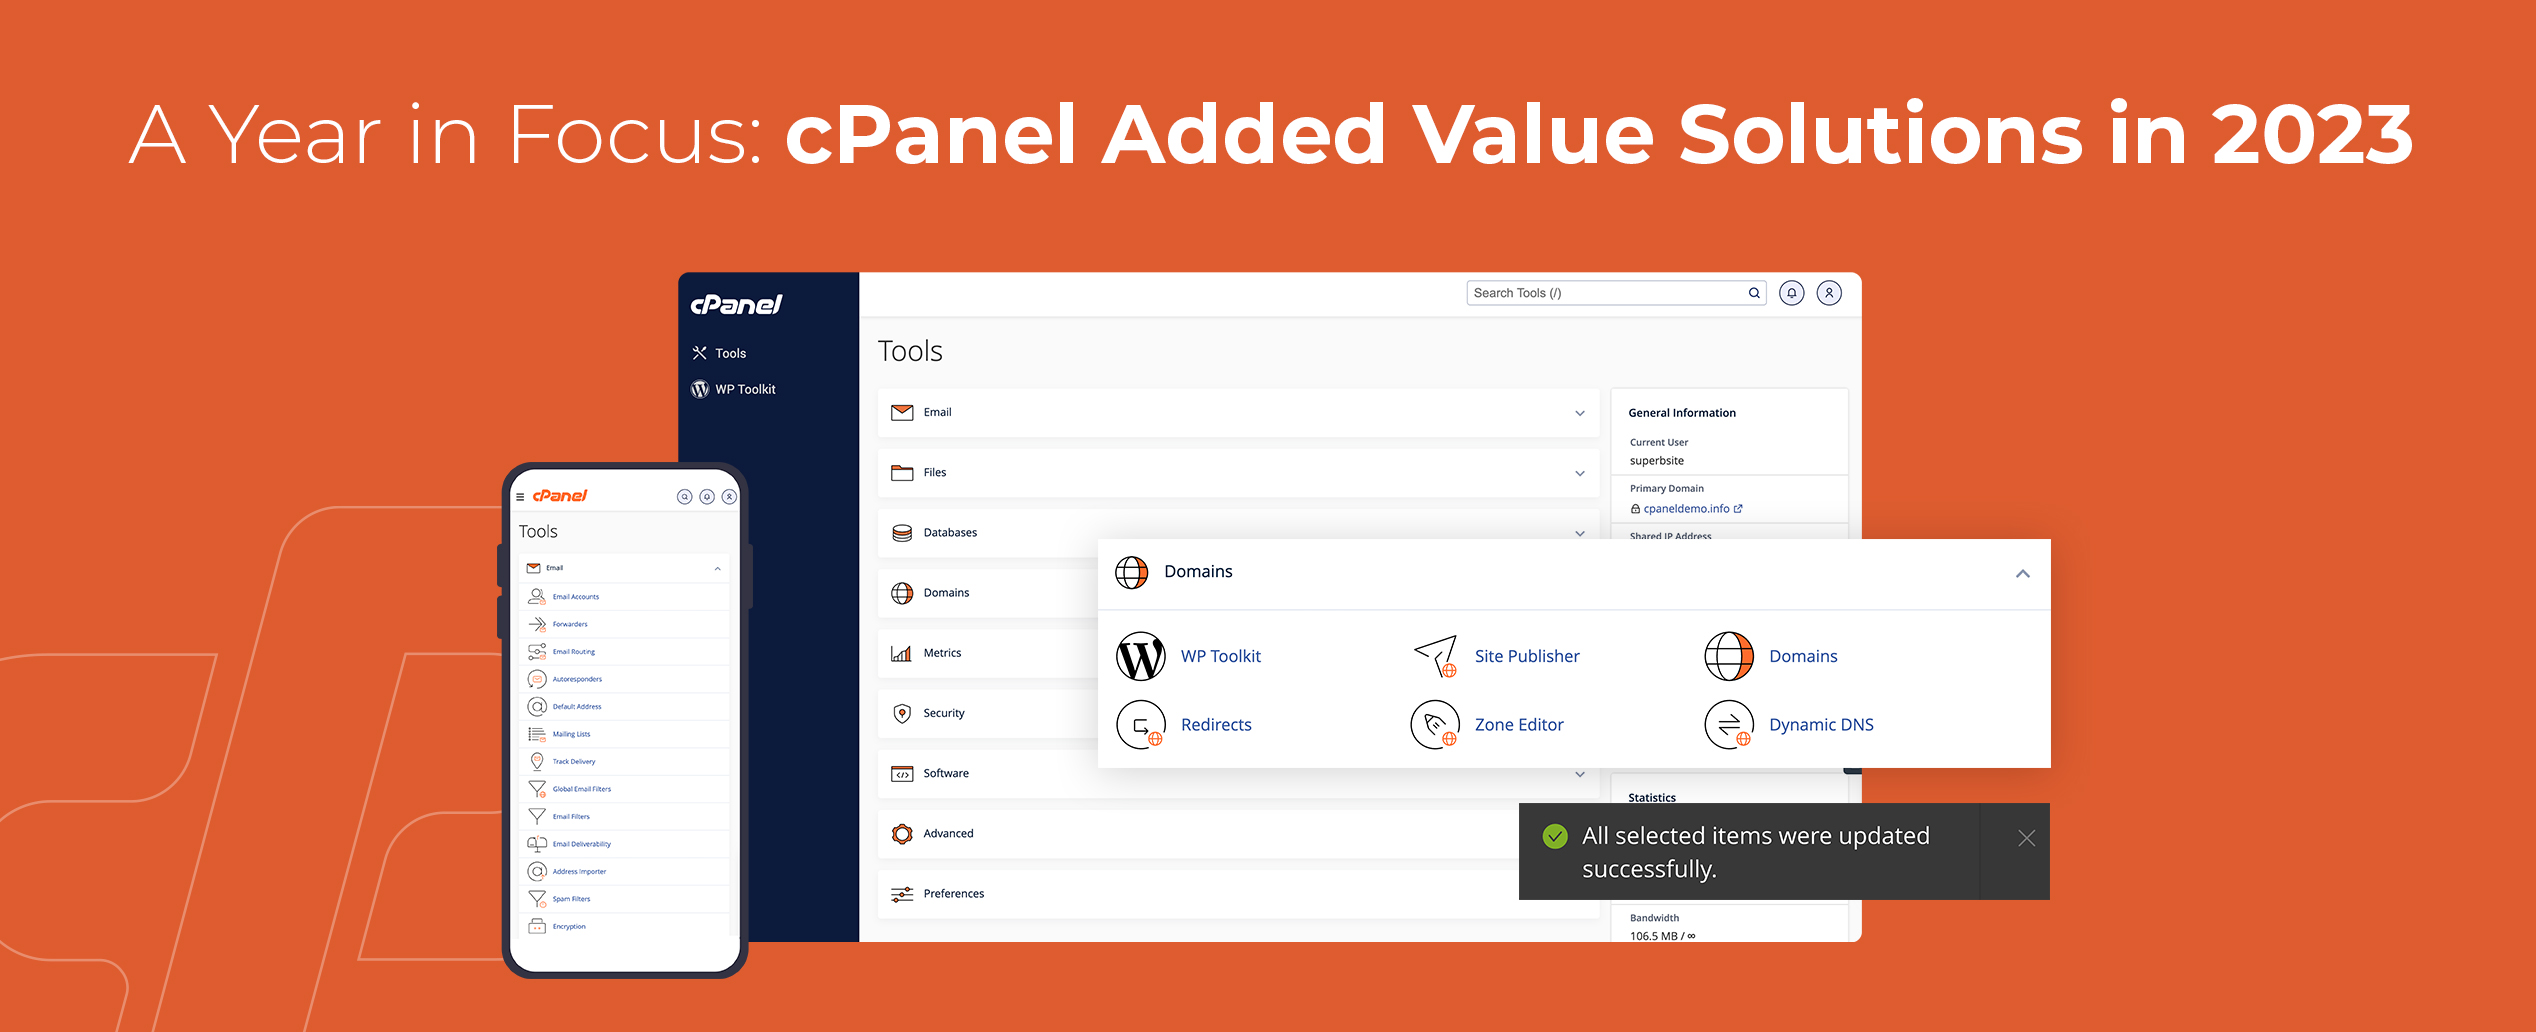 A Year in Focus: cPanel Added Value Solutions in 2023